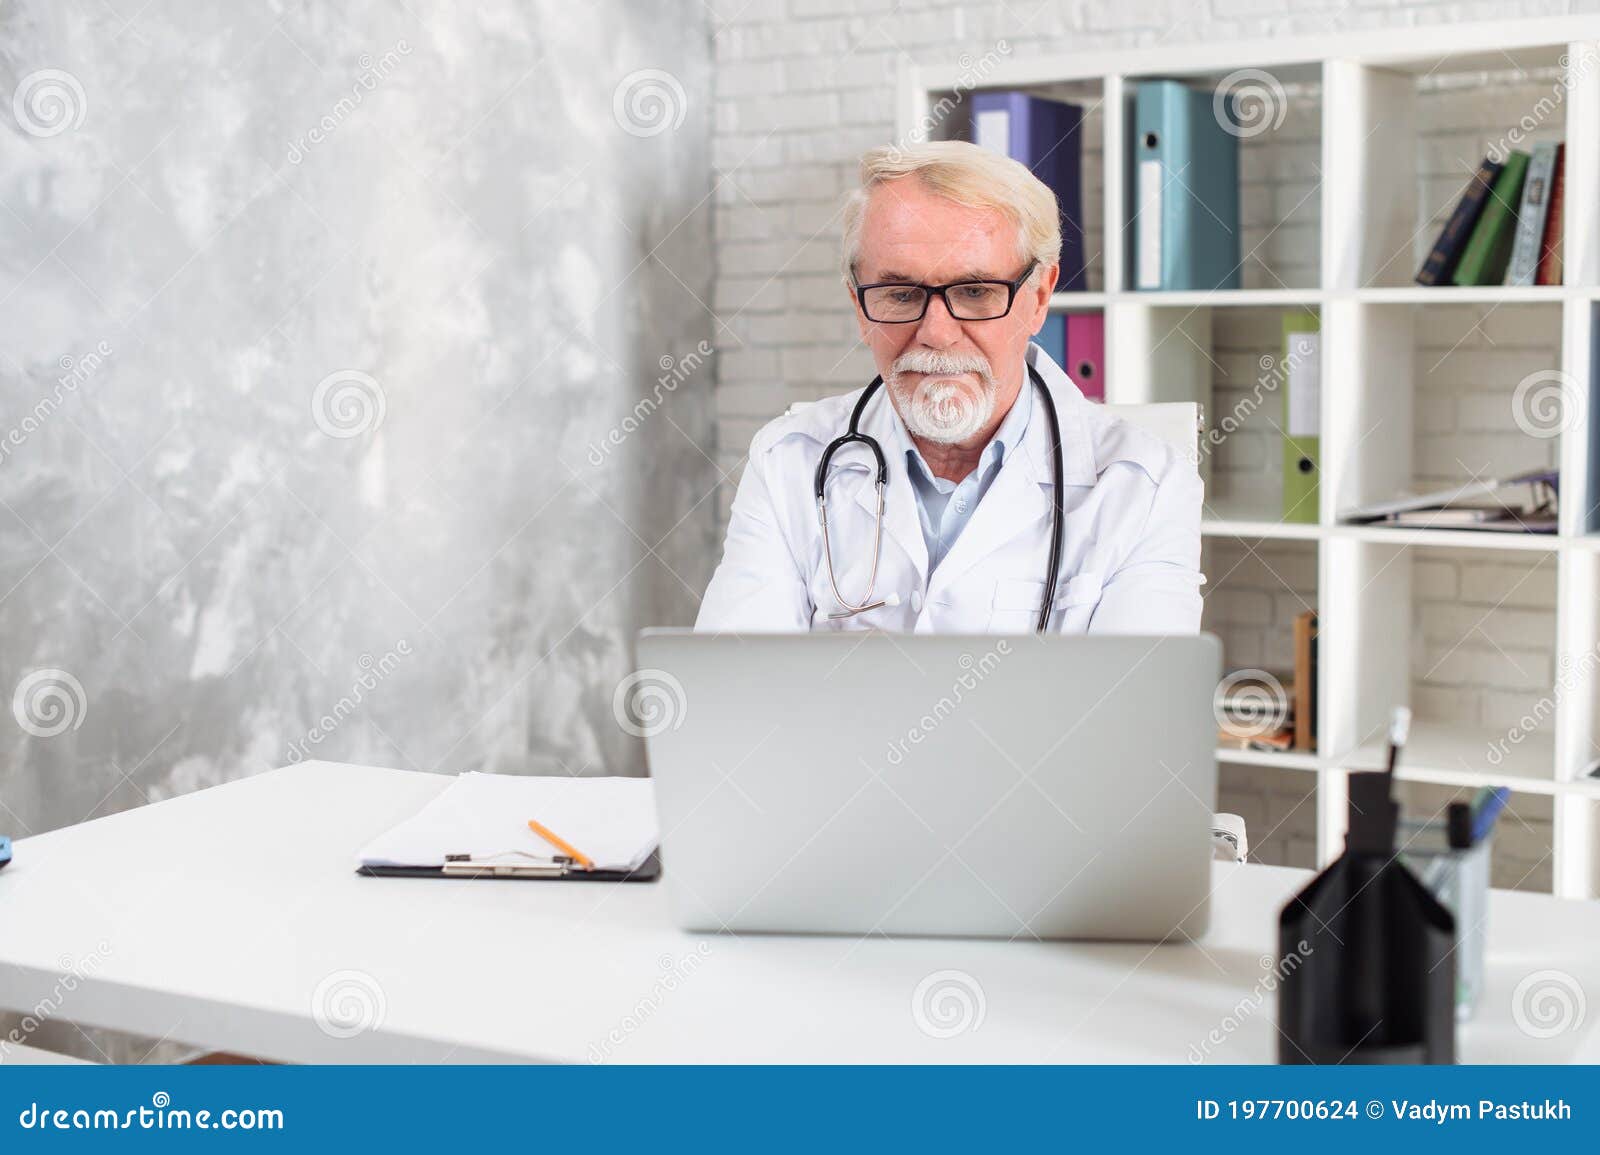 Senior Male Doctor with a Stethoscpe Using Laptop Stock Photo - Image ...